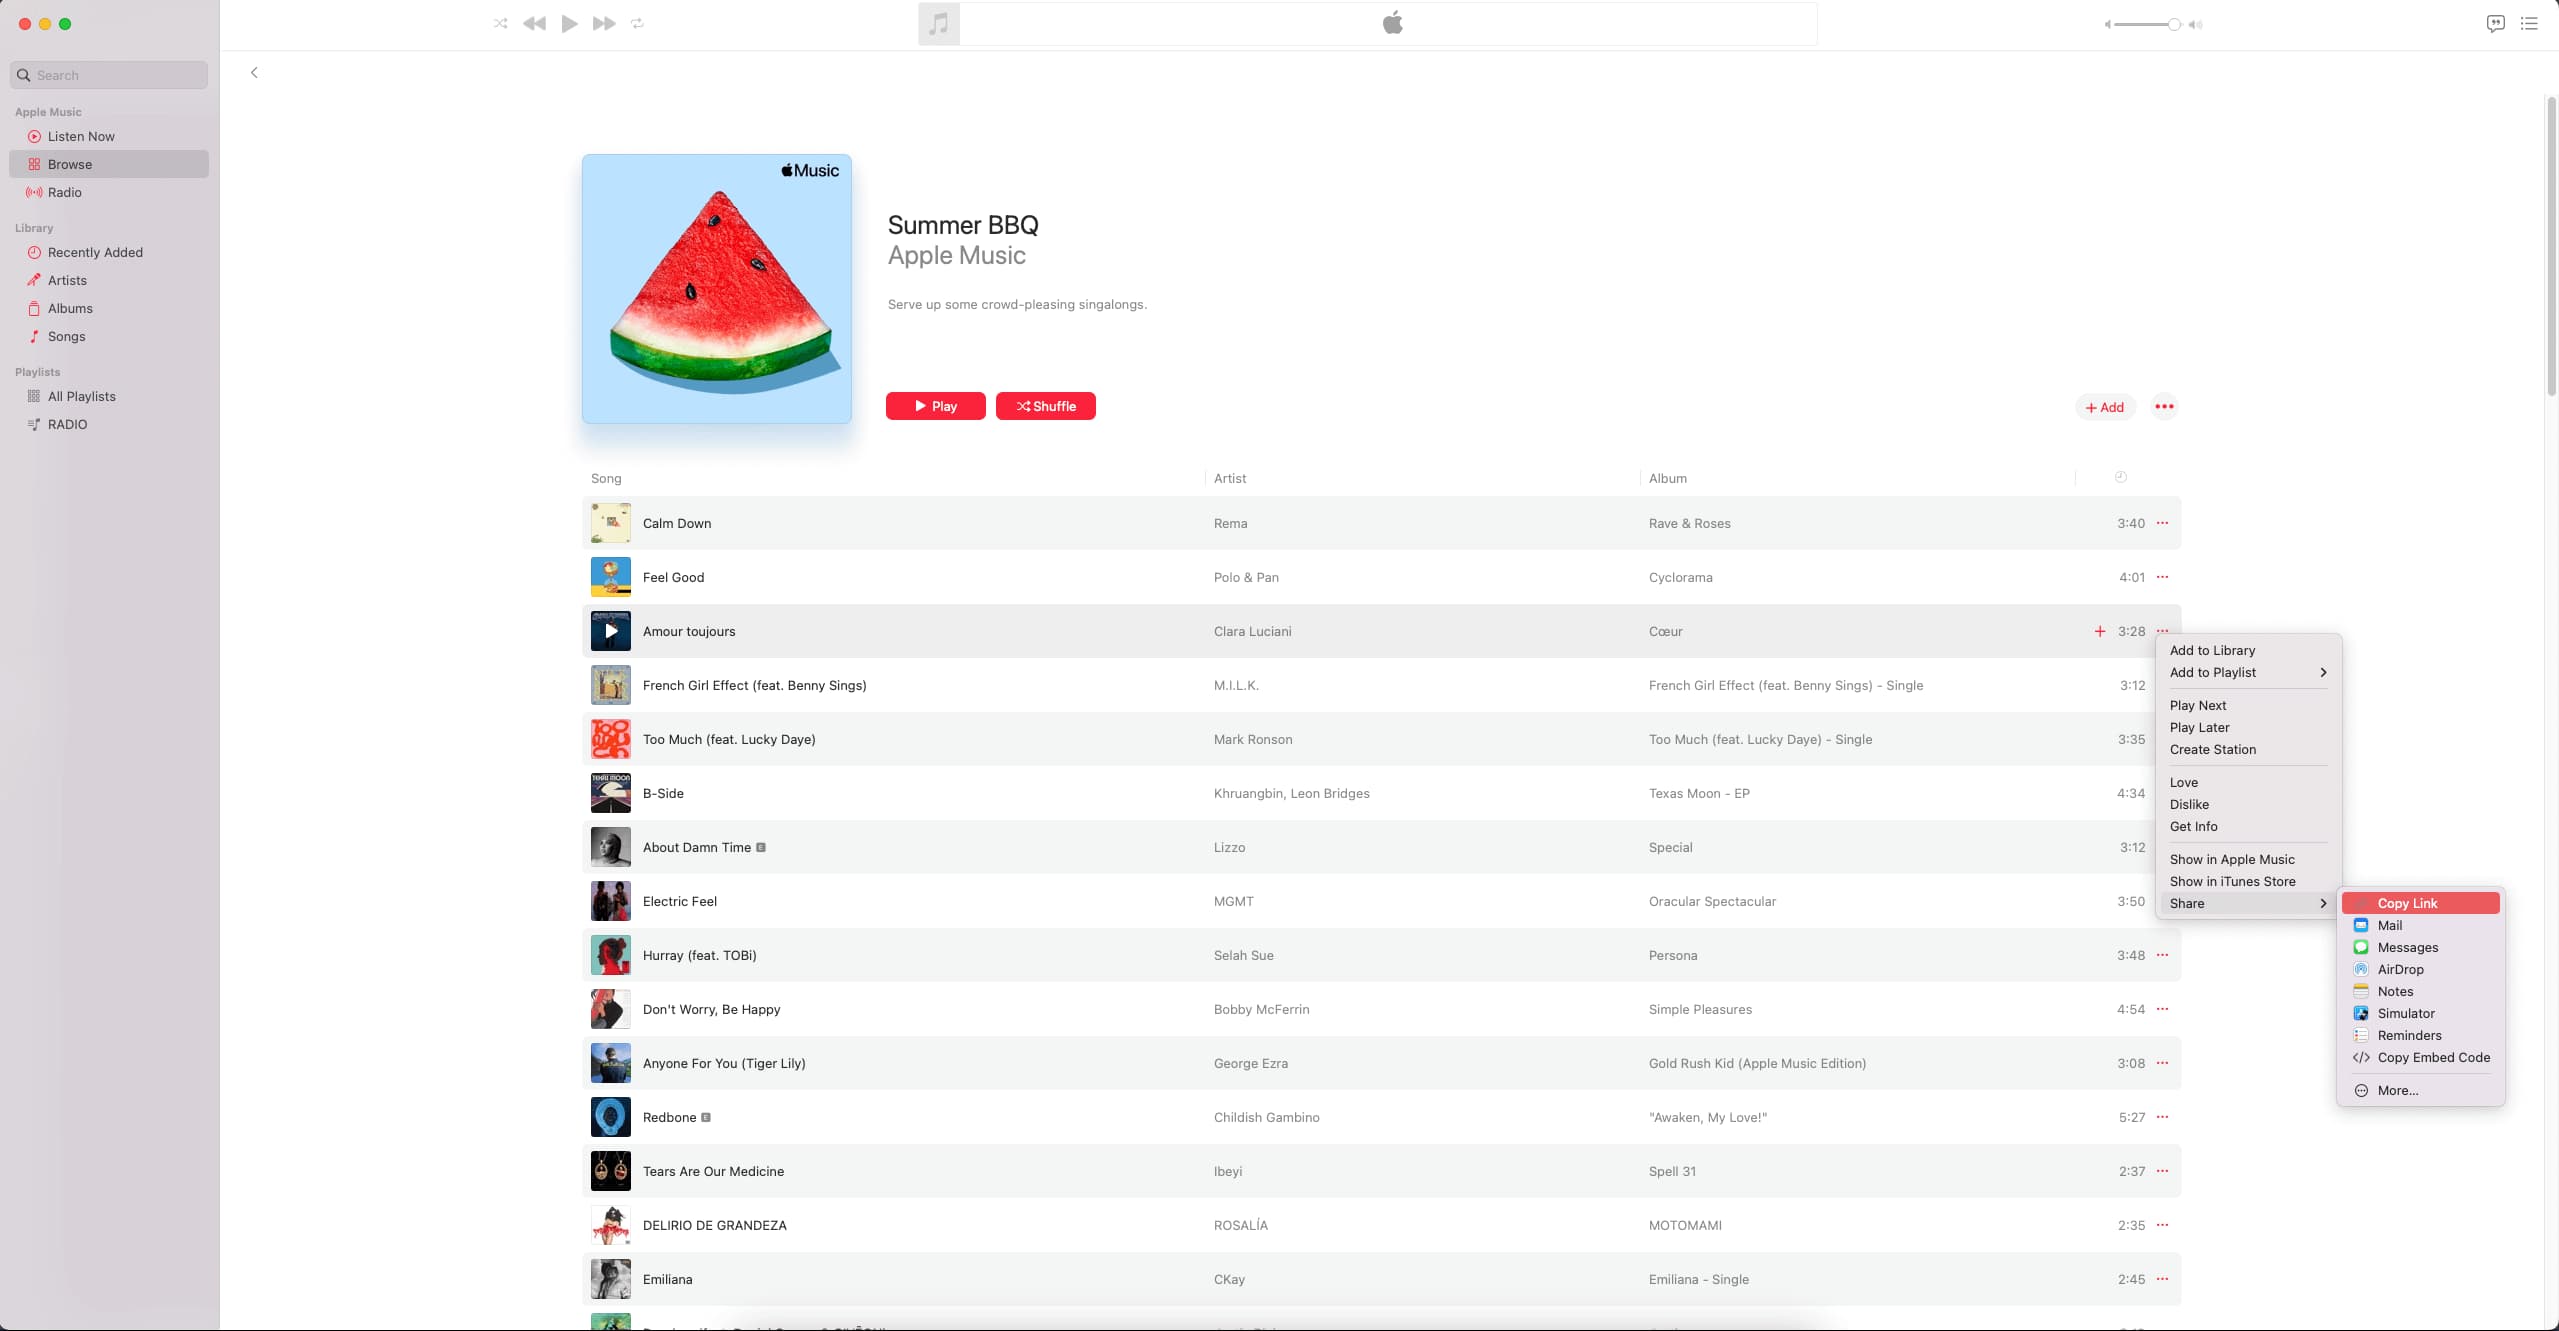 How to download songs from Apple Music desktop app?